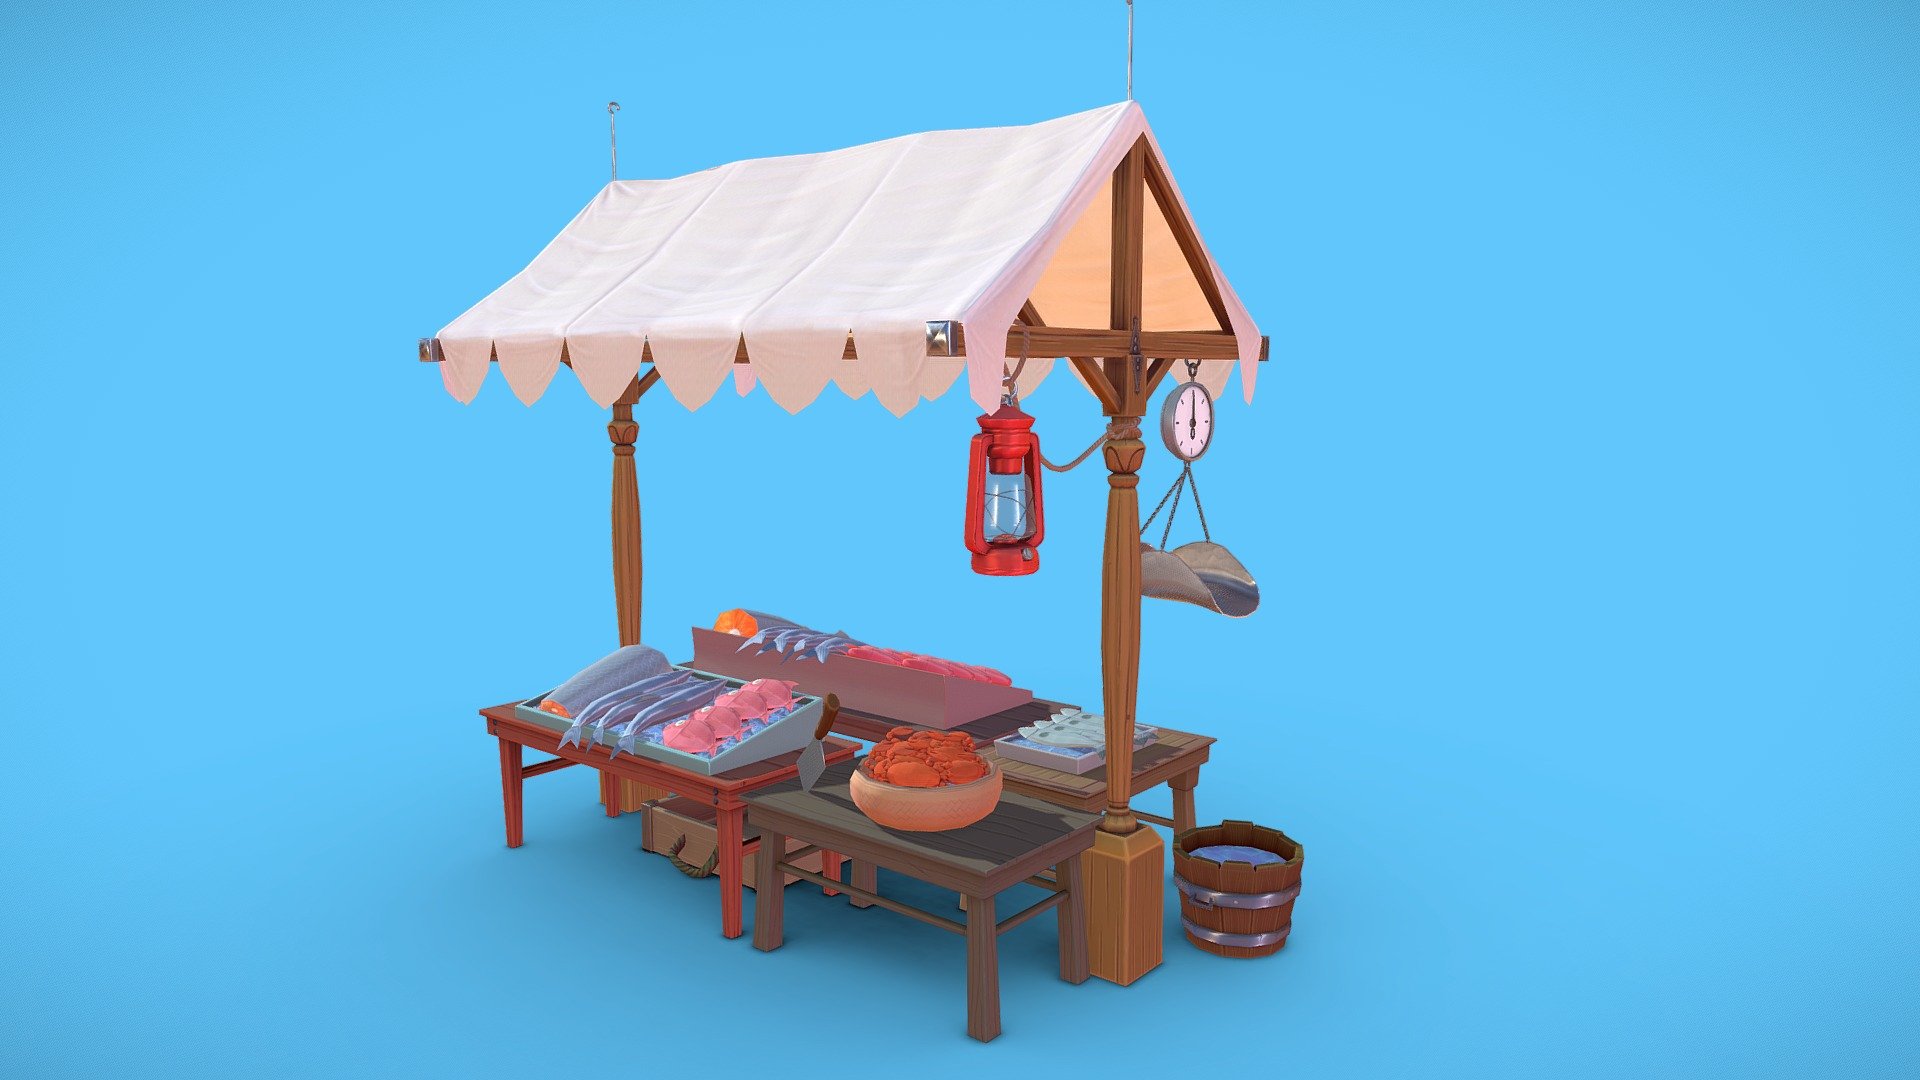 Low-poly Stylized Fish stall

Thank! Concept Art by : Cory Loftis

I took the model to render in Unreal4, it looks awesome!
 - Stylized Fish stall - 3D model by KTP_R (@KittiphopR) 3d model